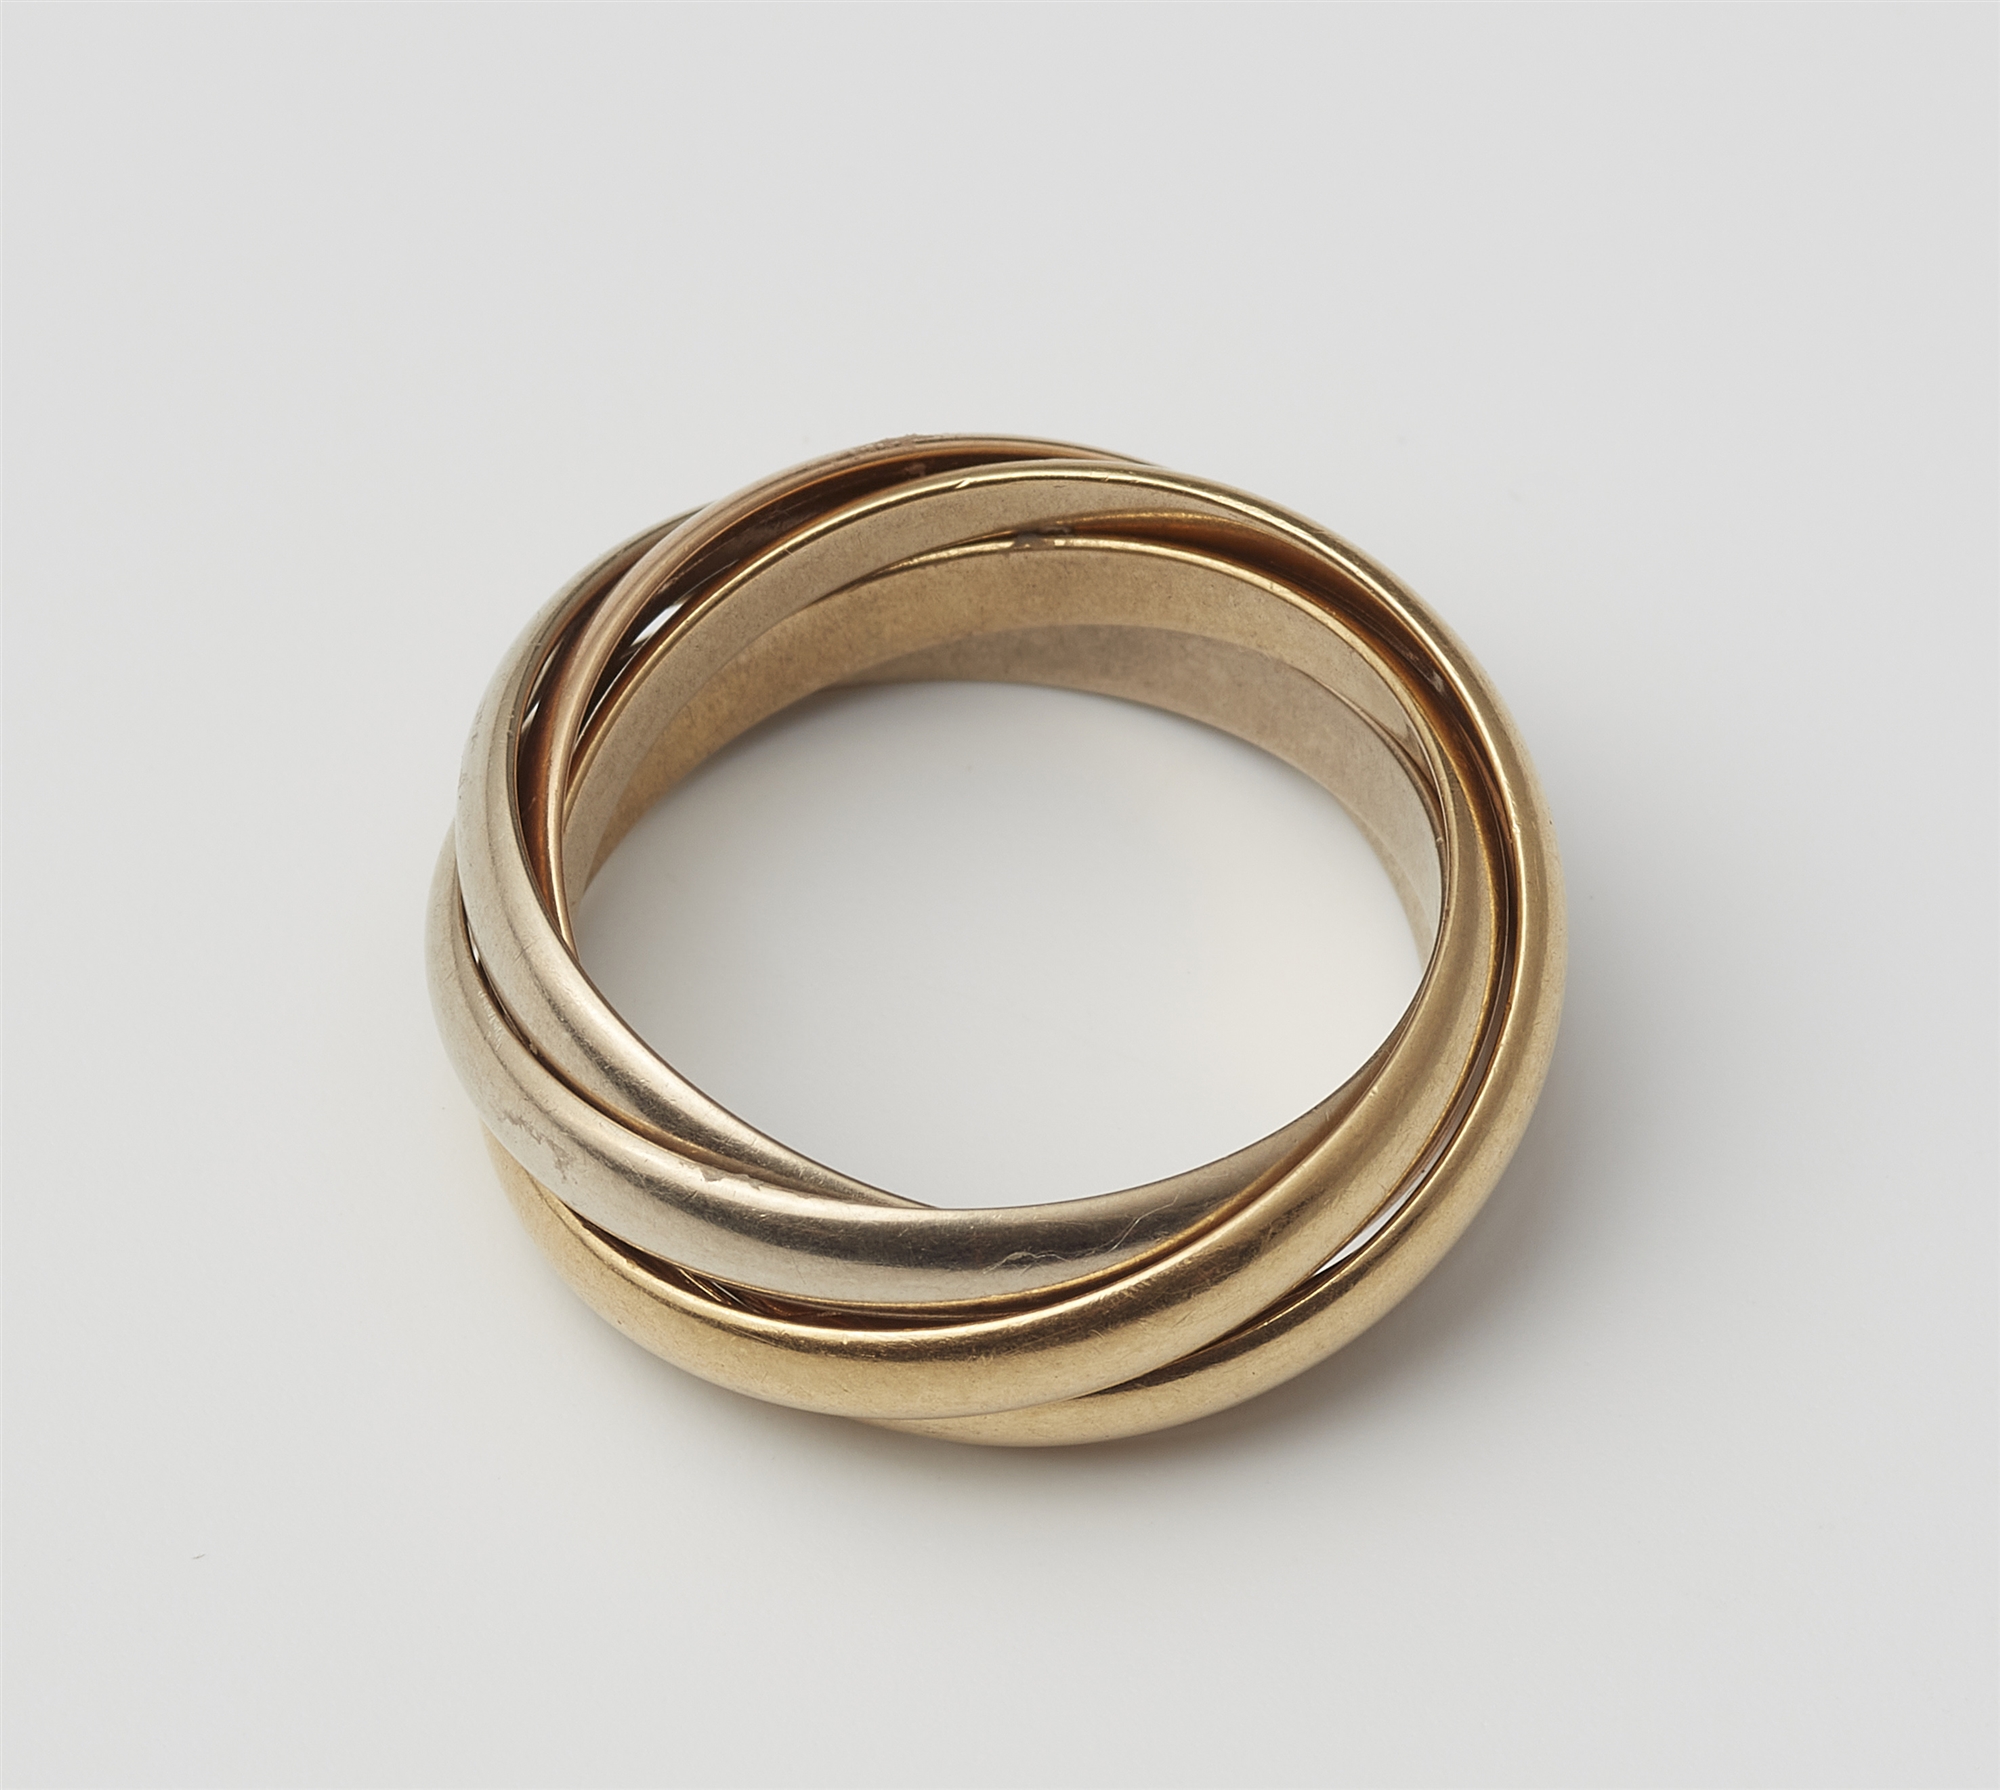 A five band 18 kt gold Trinity ring. - Image 3 of 3